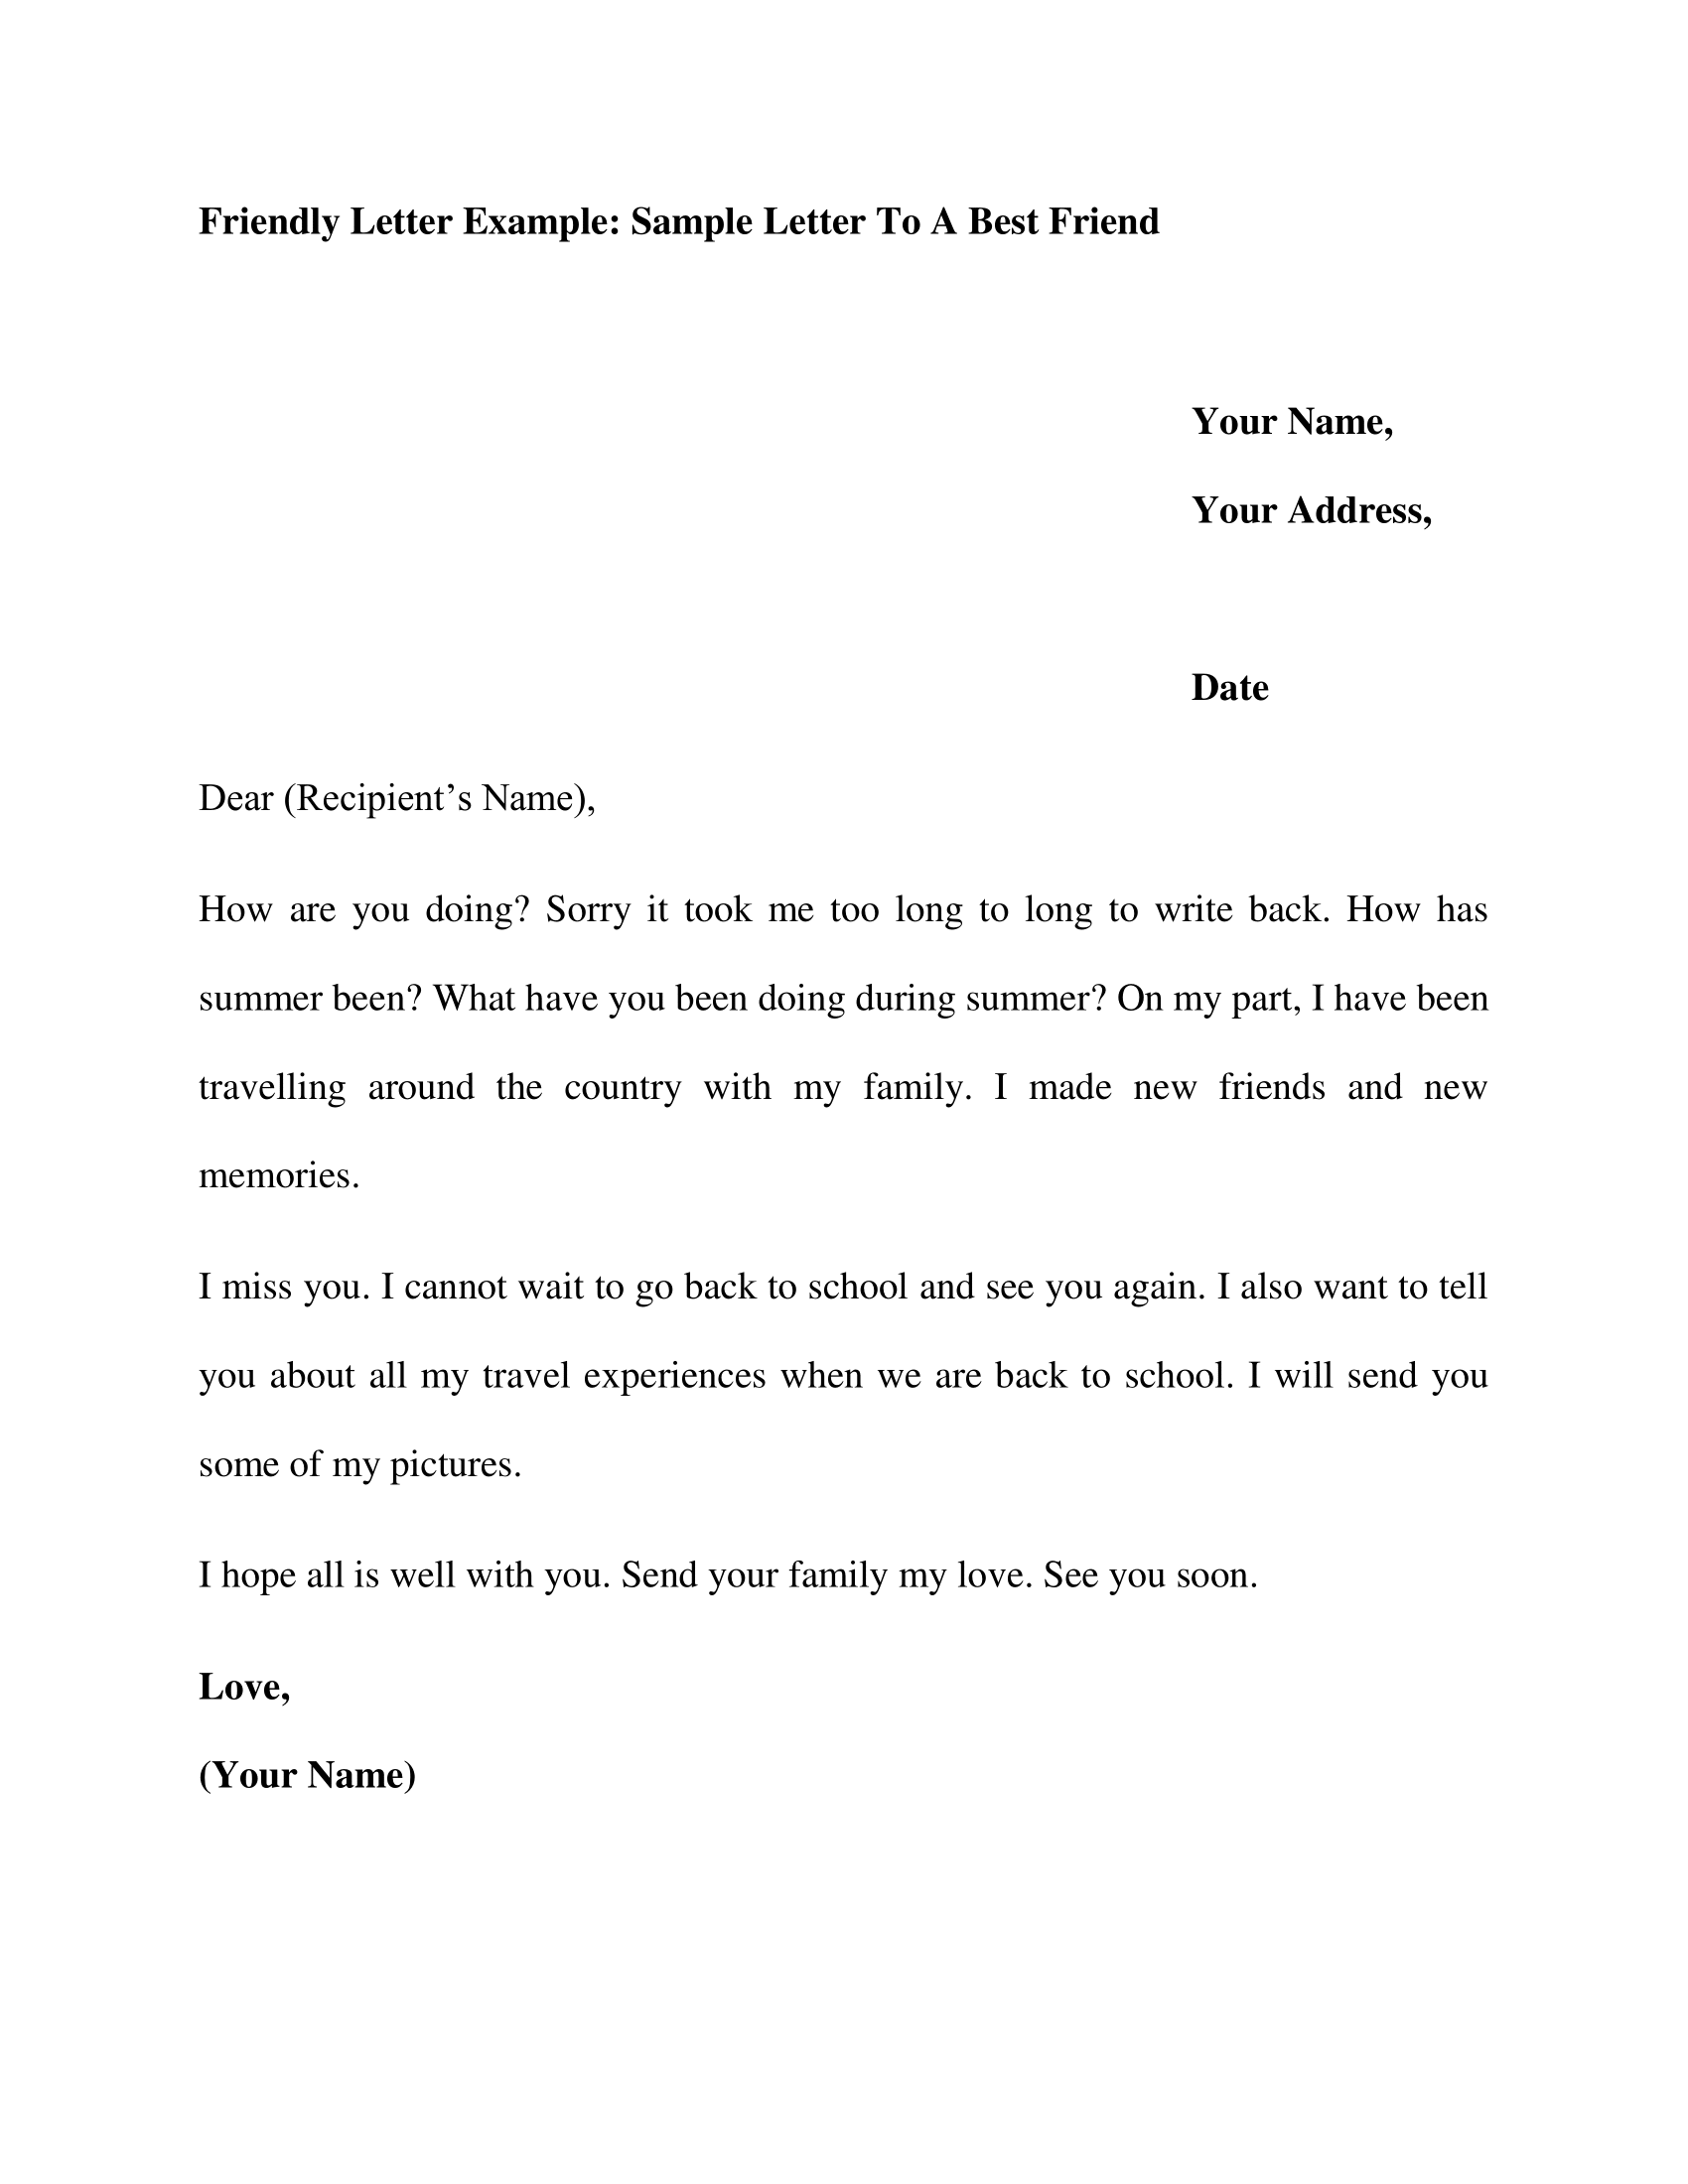 a friendly letter to a friend